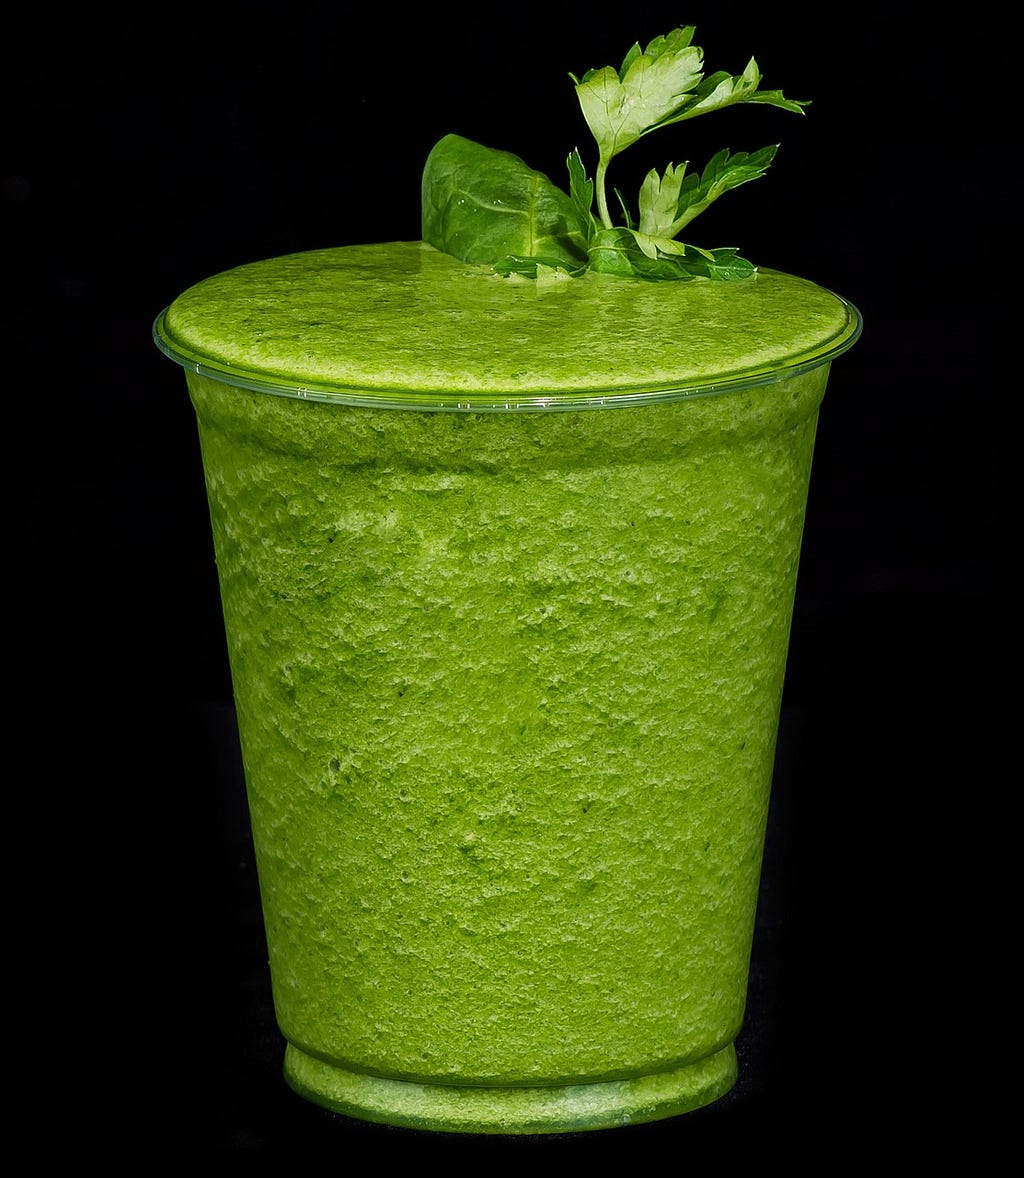 A chunky cup of green juice. Aquired taste, or put lots of piña in it.